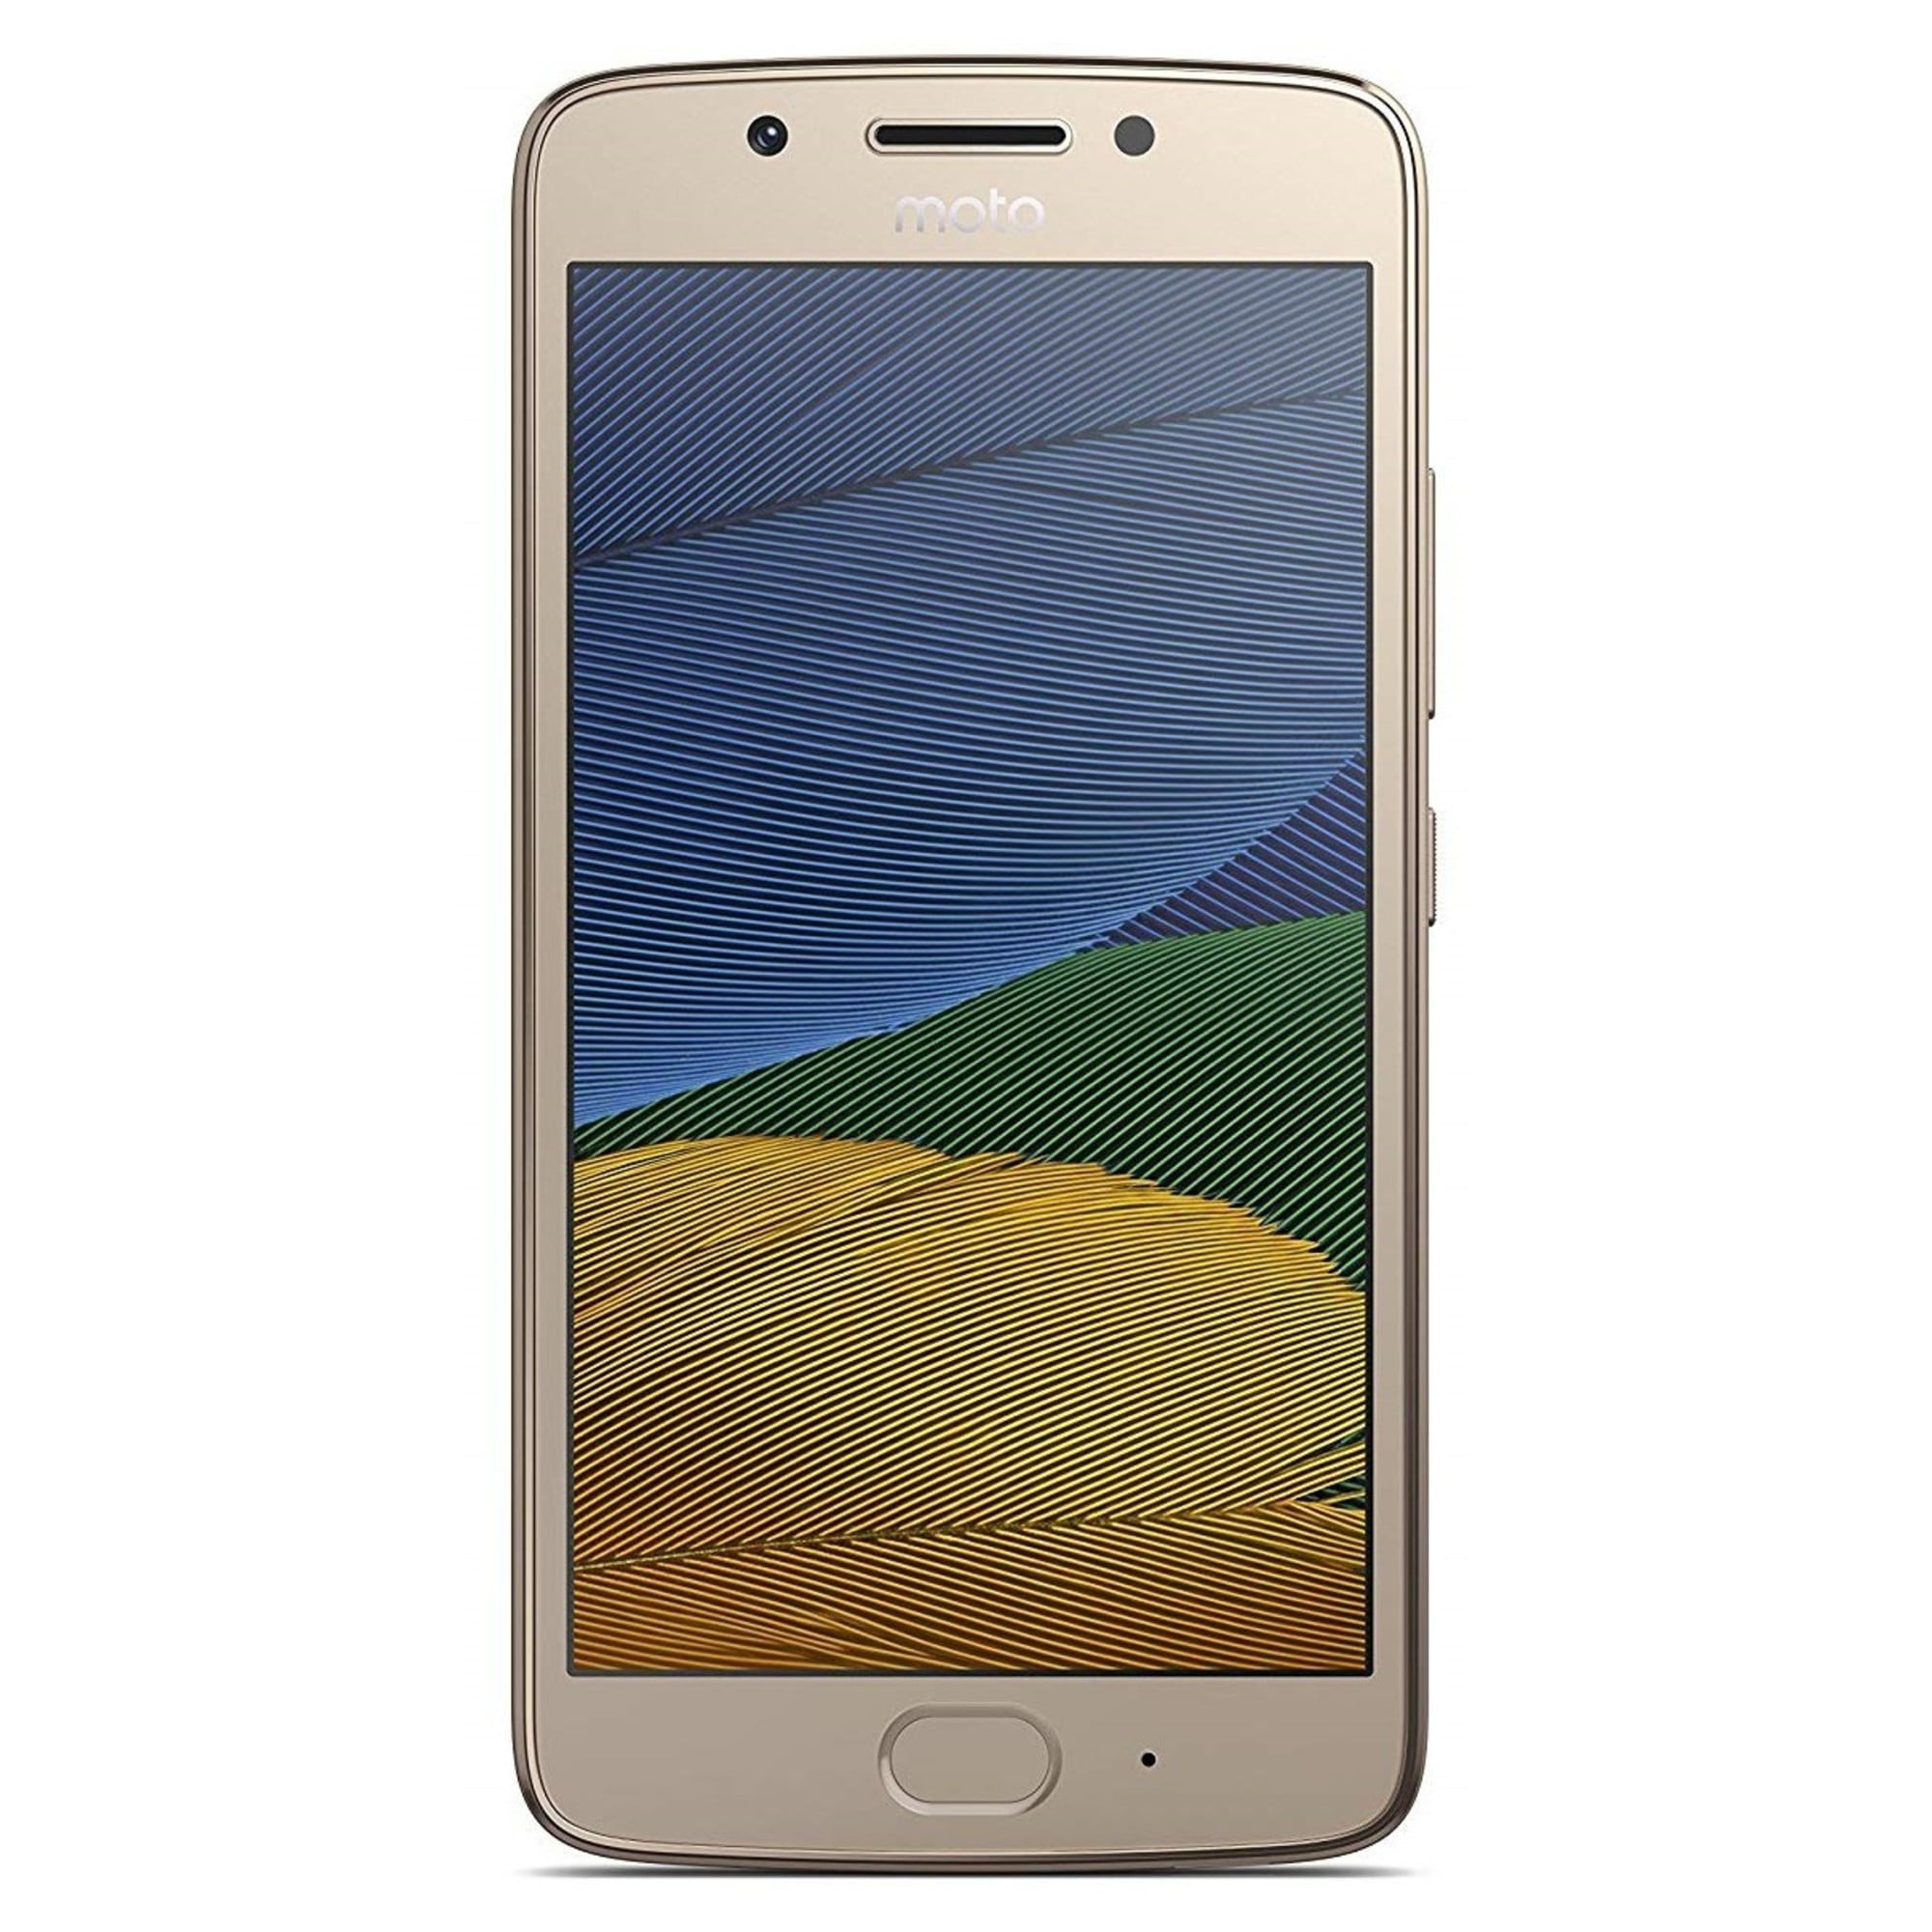  Moto G5 (5th Generation) - 32GB GSM Unlocked Android Smartphone  (Lunar Gray) : Cell Phones & Accessories